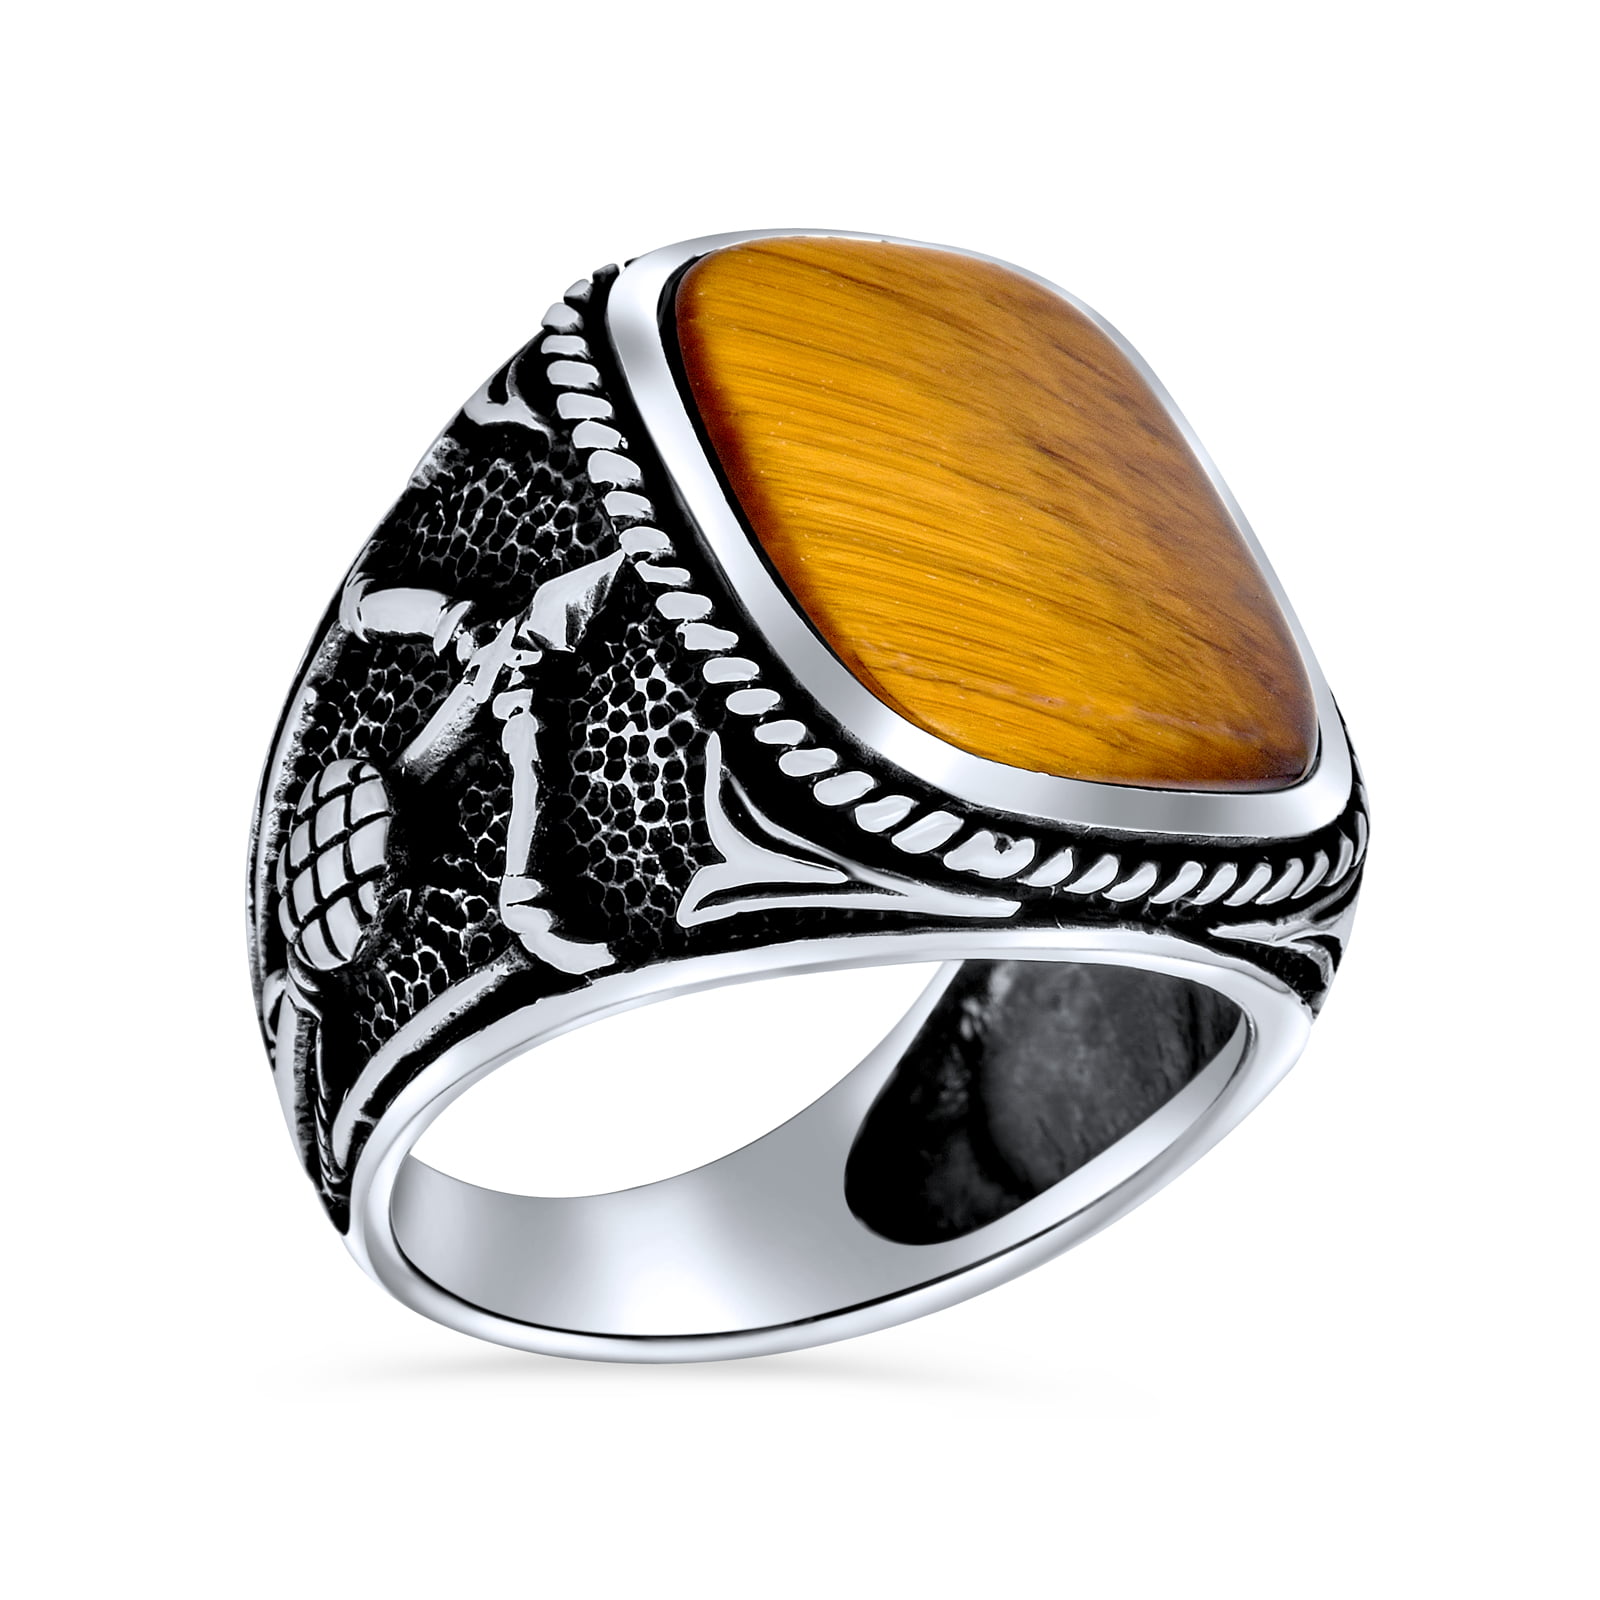 Handmade with Cute Tigers Eye Stone 925 Sterling Silver Turkish Luxury Mens Ring 